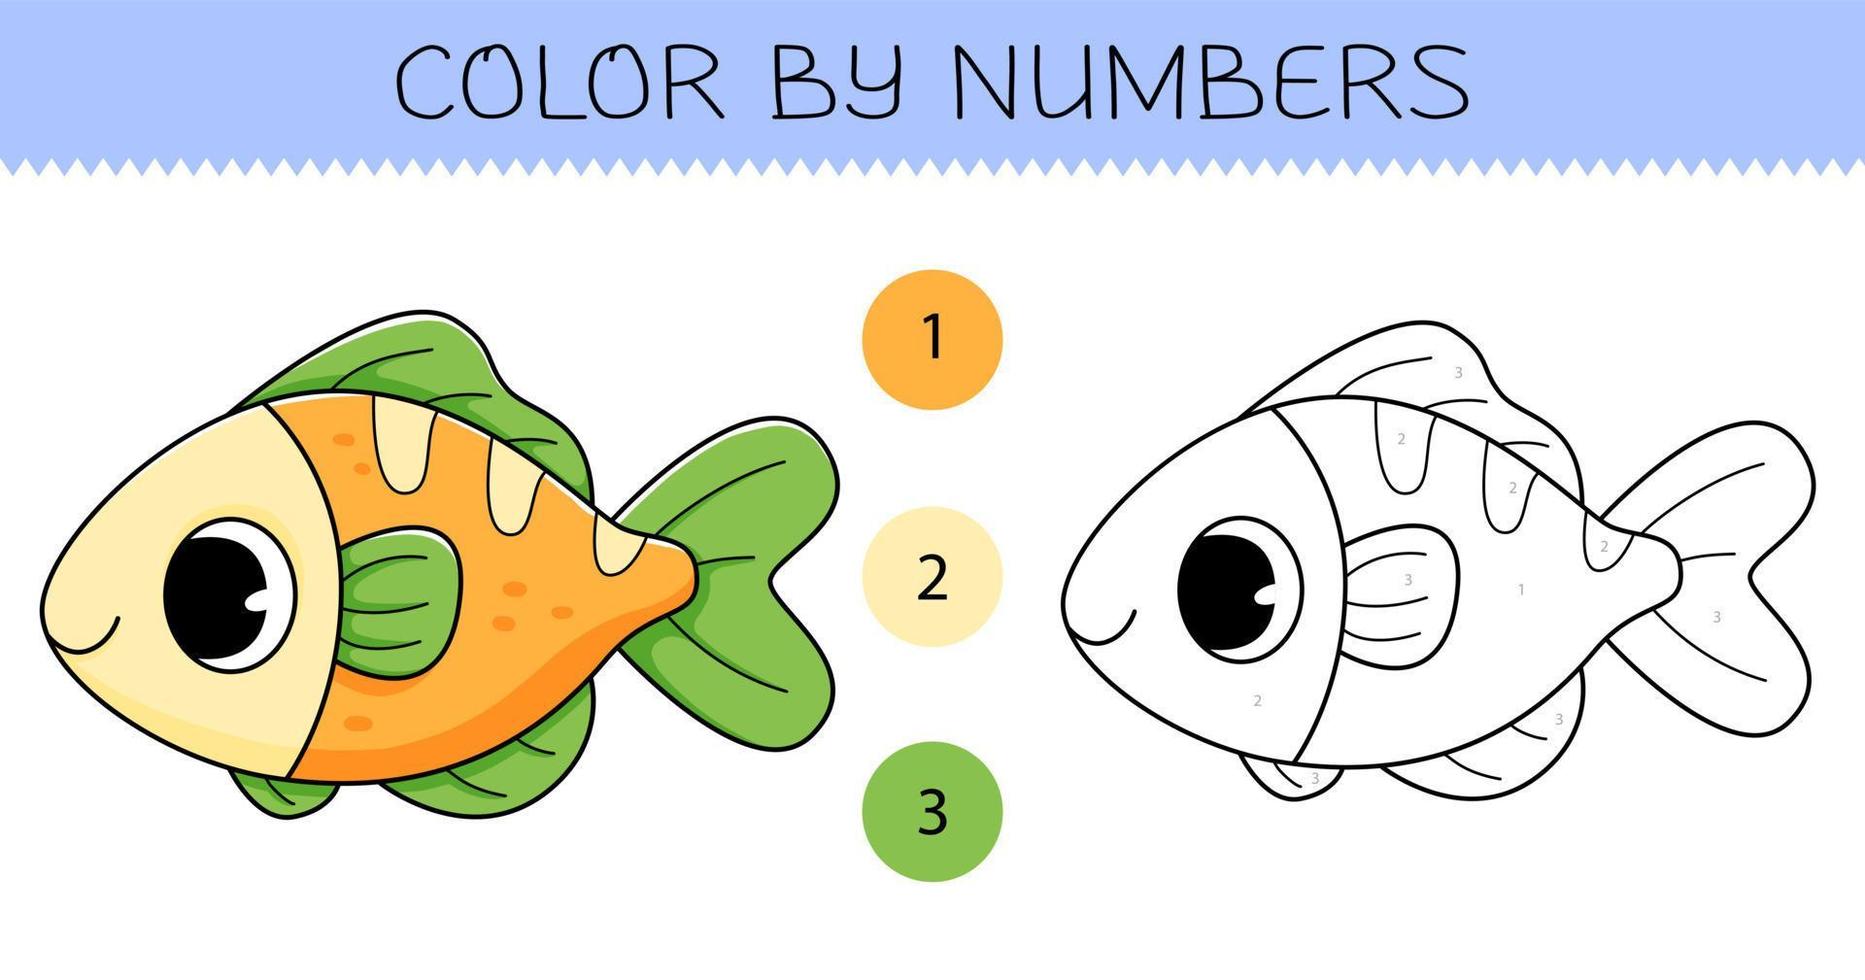 Color by numbers coloring book for kids with fish. Coloring page with cute cartoon fish with an example for coloring. Monochrome and color versions vector